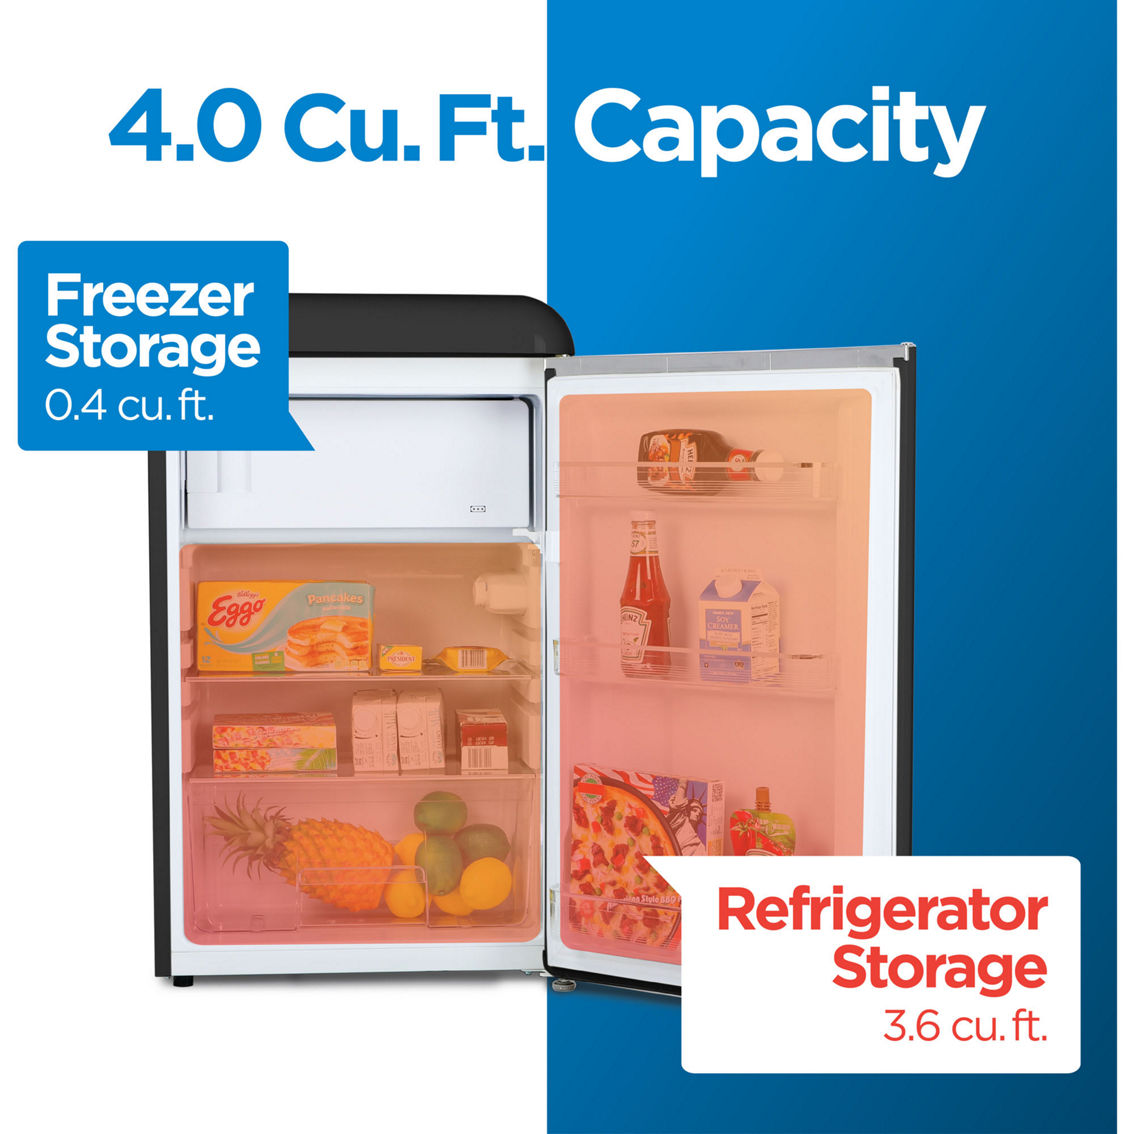 Commercial Cool 4.0 Cubic Foot Retro Refrigerator - Image 4 of 7